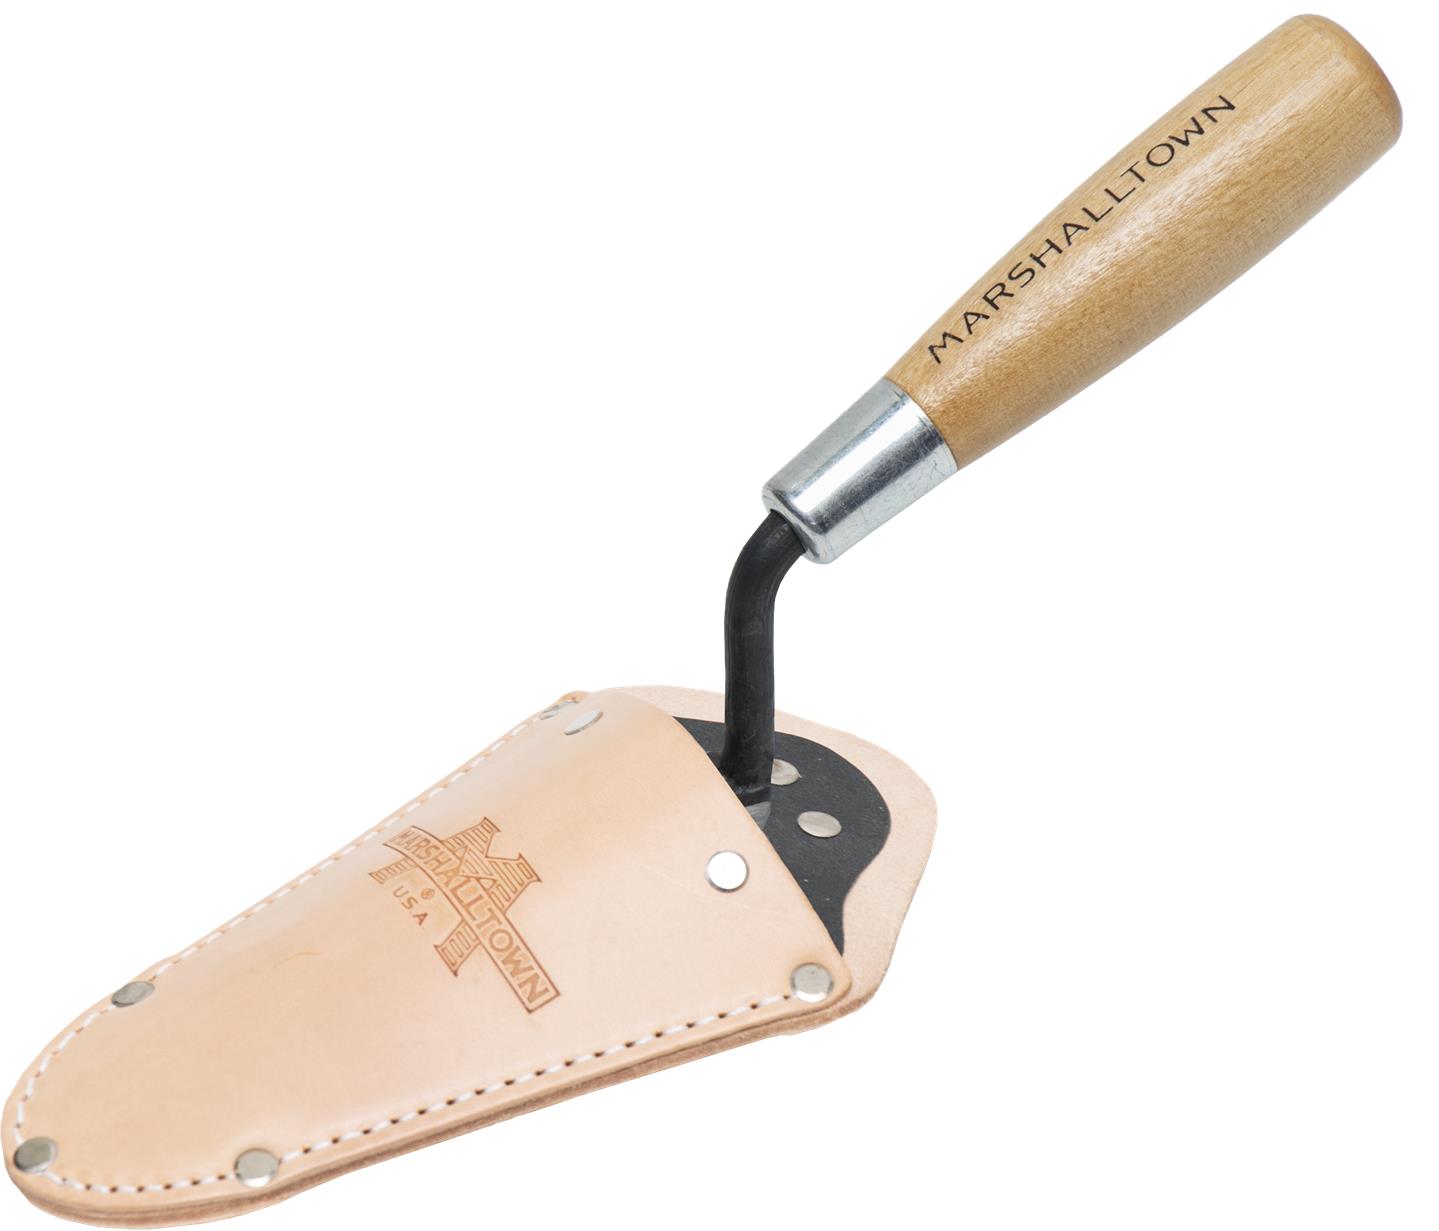 Marshalltown 16942 Archaeology Trowel-4" Stiff London Style Pointing Trowel with Holster